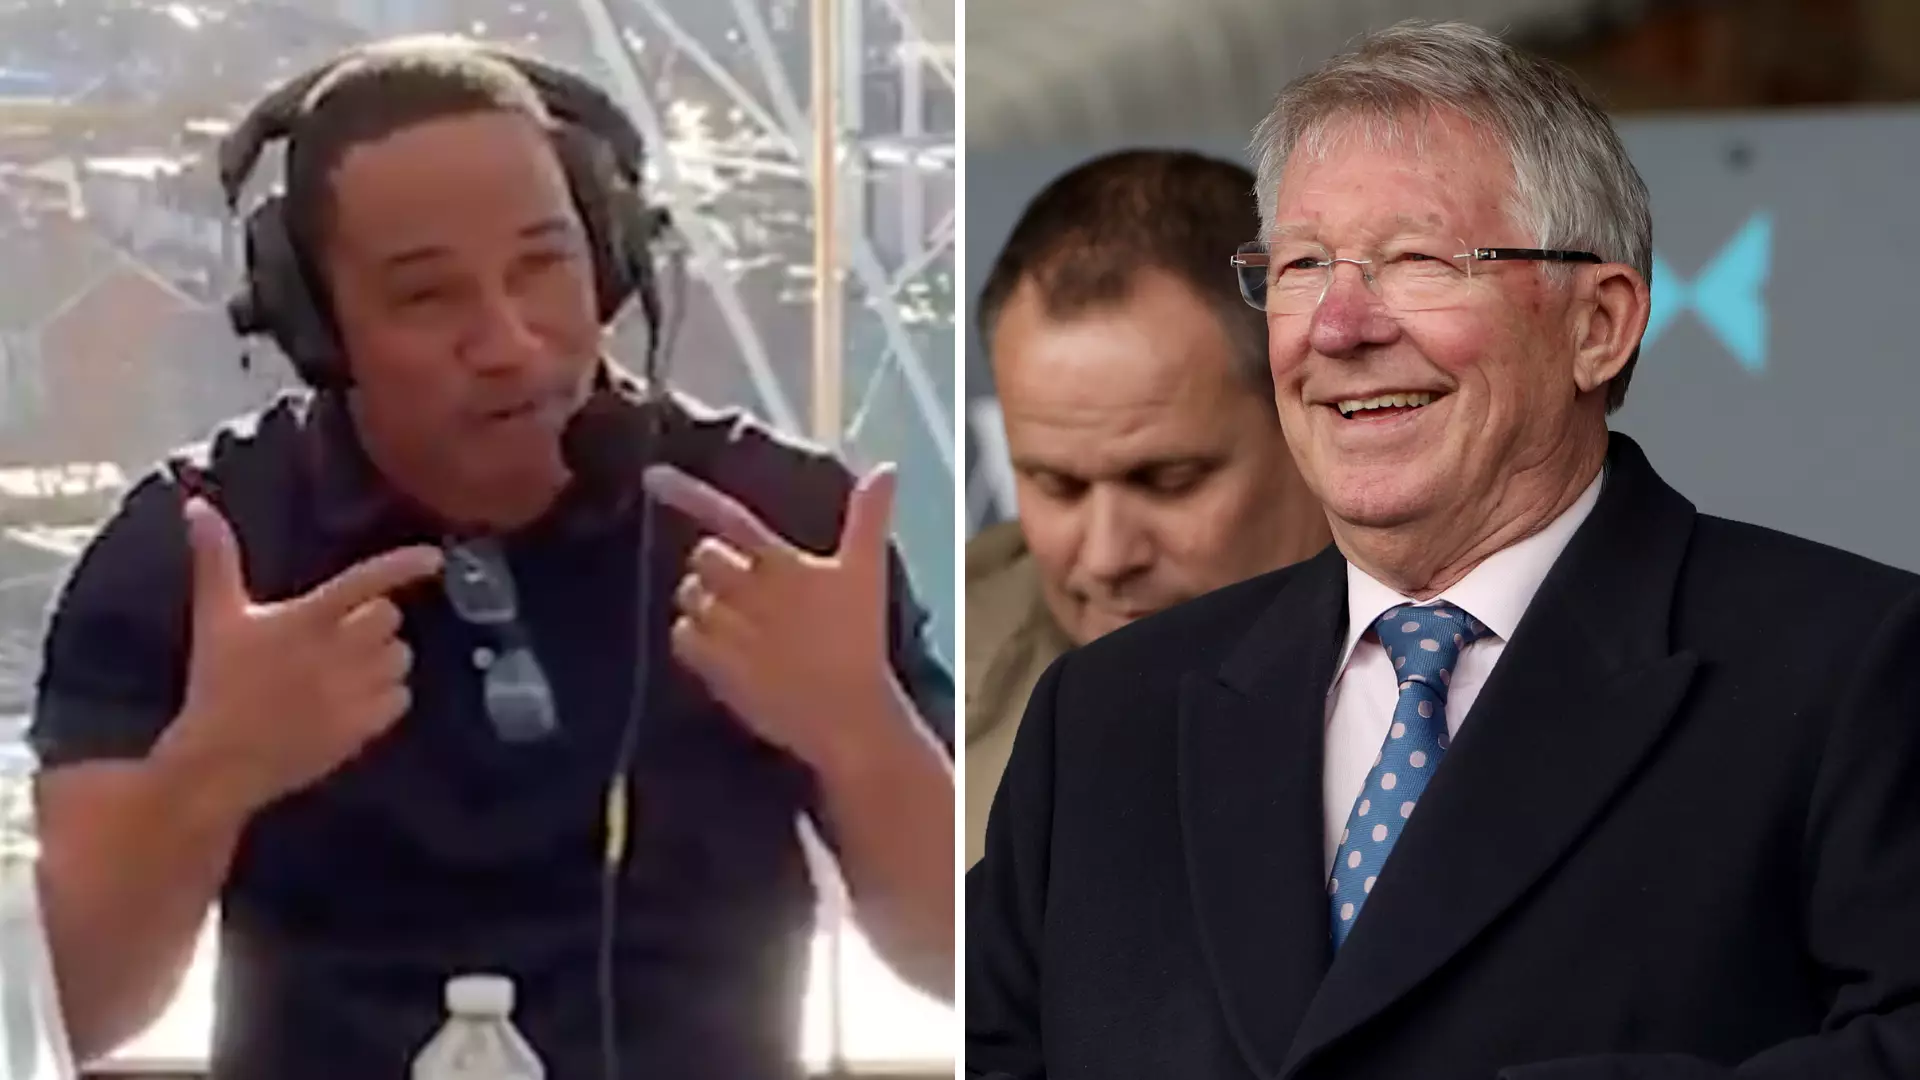 Furious Sir Alex Ferguson Gave Paul Ince The Ultimate Hairdryer Treatment In Incredible Argument